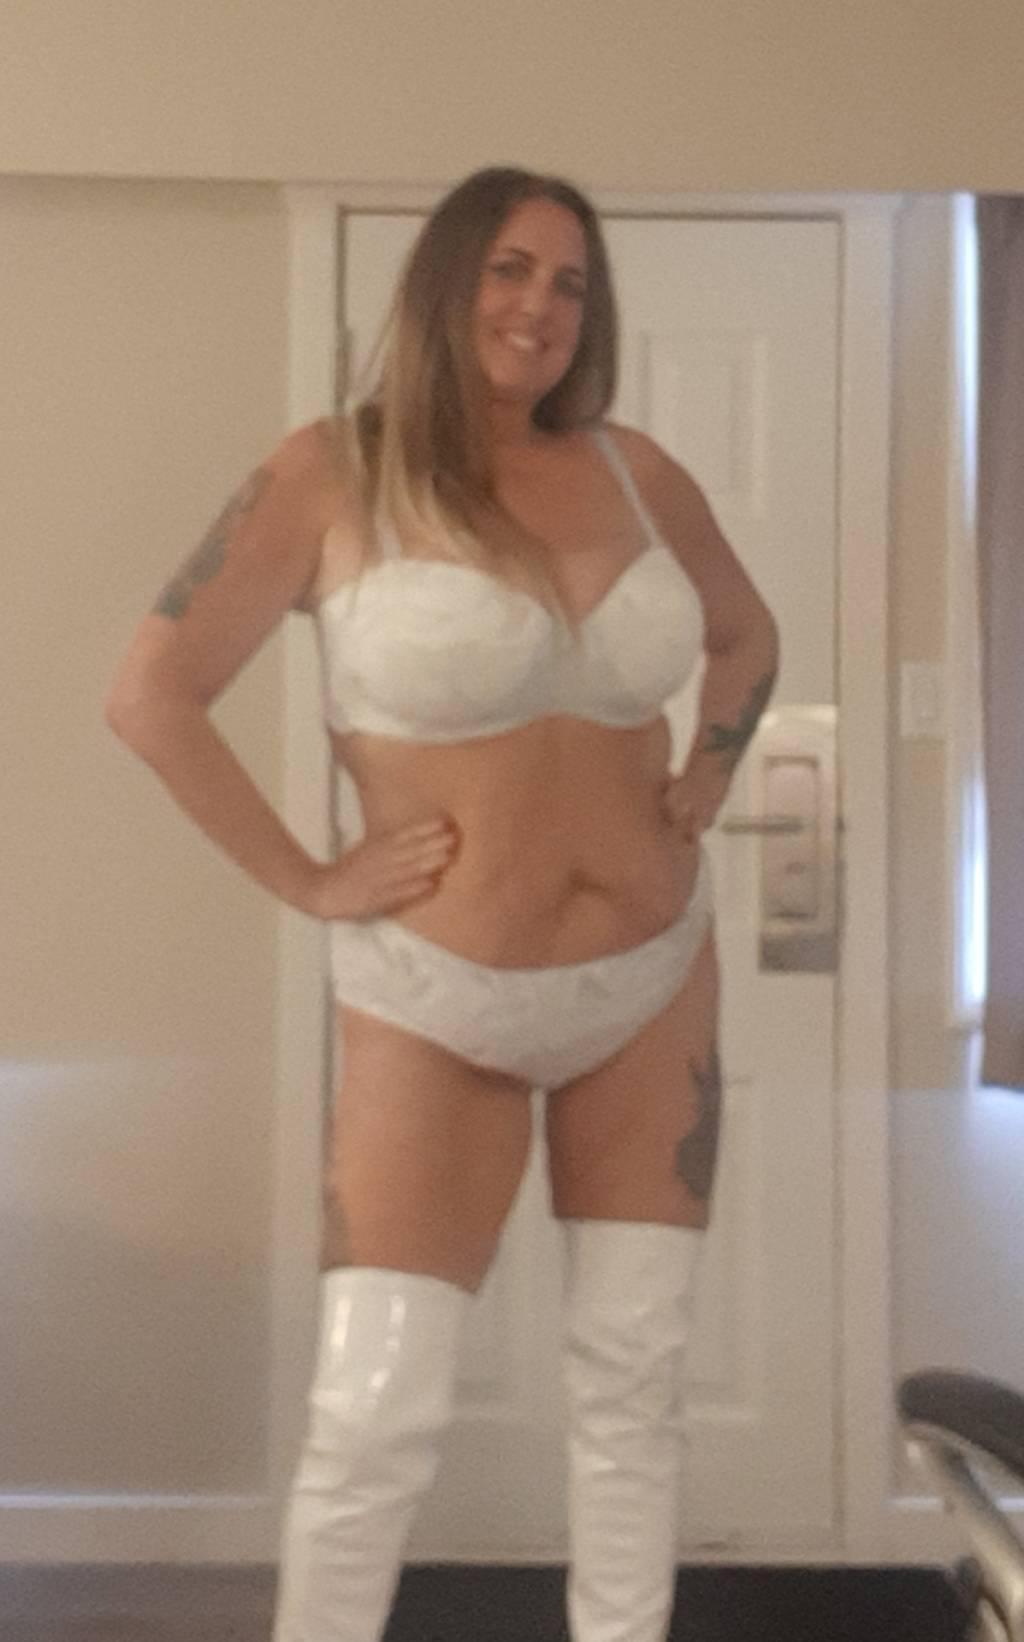 pre booking may 18-22 Powell river sechelt cougarnikki